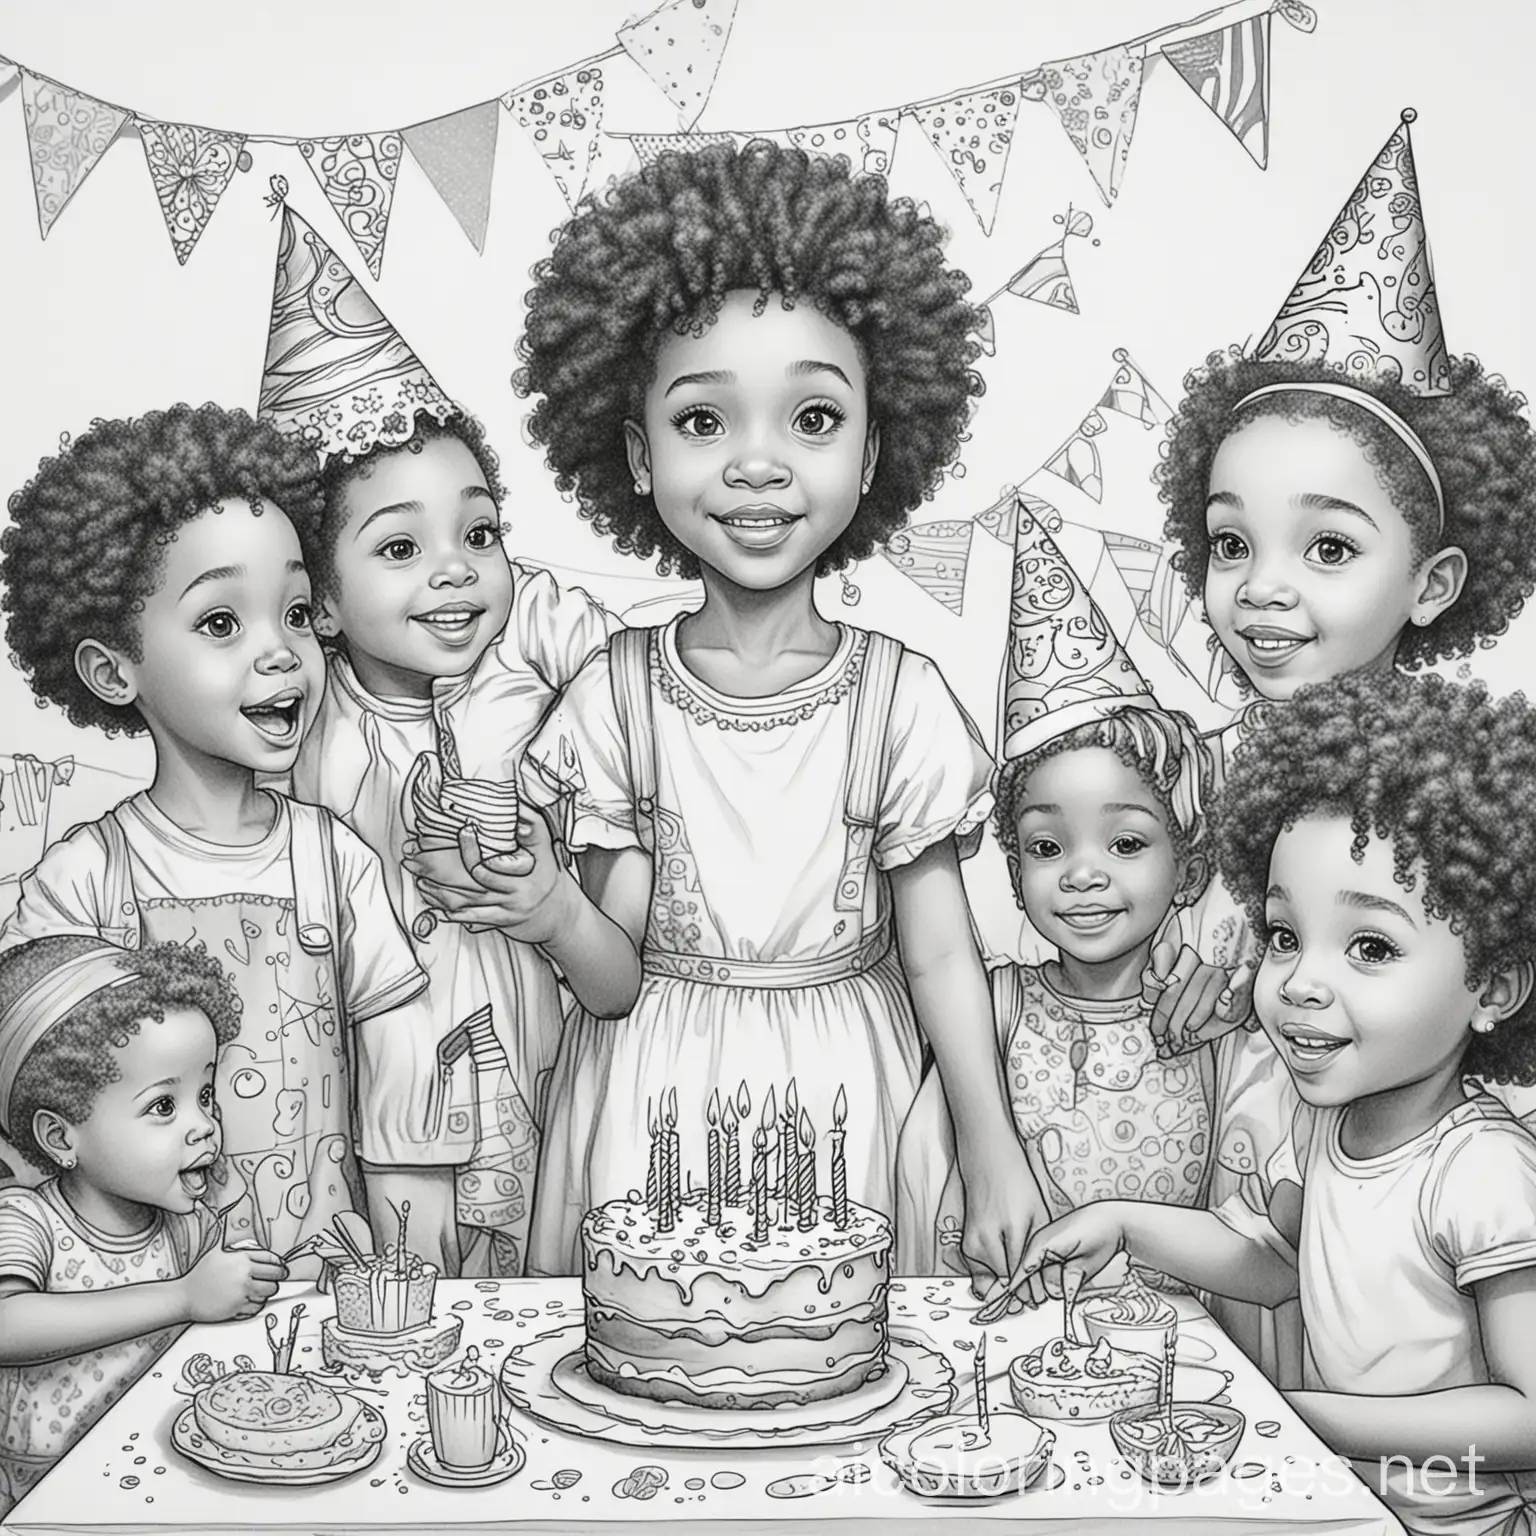 african american children at a birthday party, Coloring Page, black and white, line art, white background, Simplicity, Ample White Space. The background of the coloring page is plain white to make it easy for young children to color within the lines. The outlines of all the subjects are easy to distinguish, making it simple for kids to color without too much difficulty